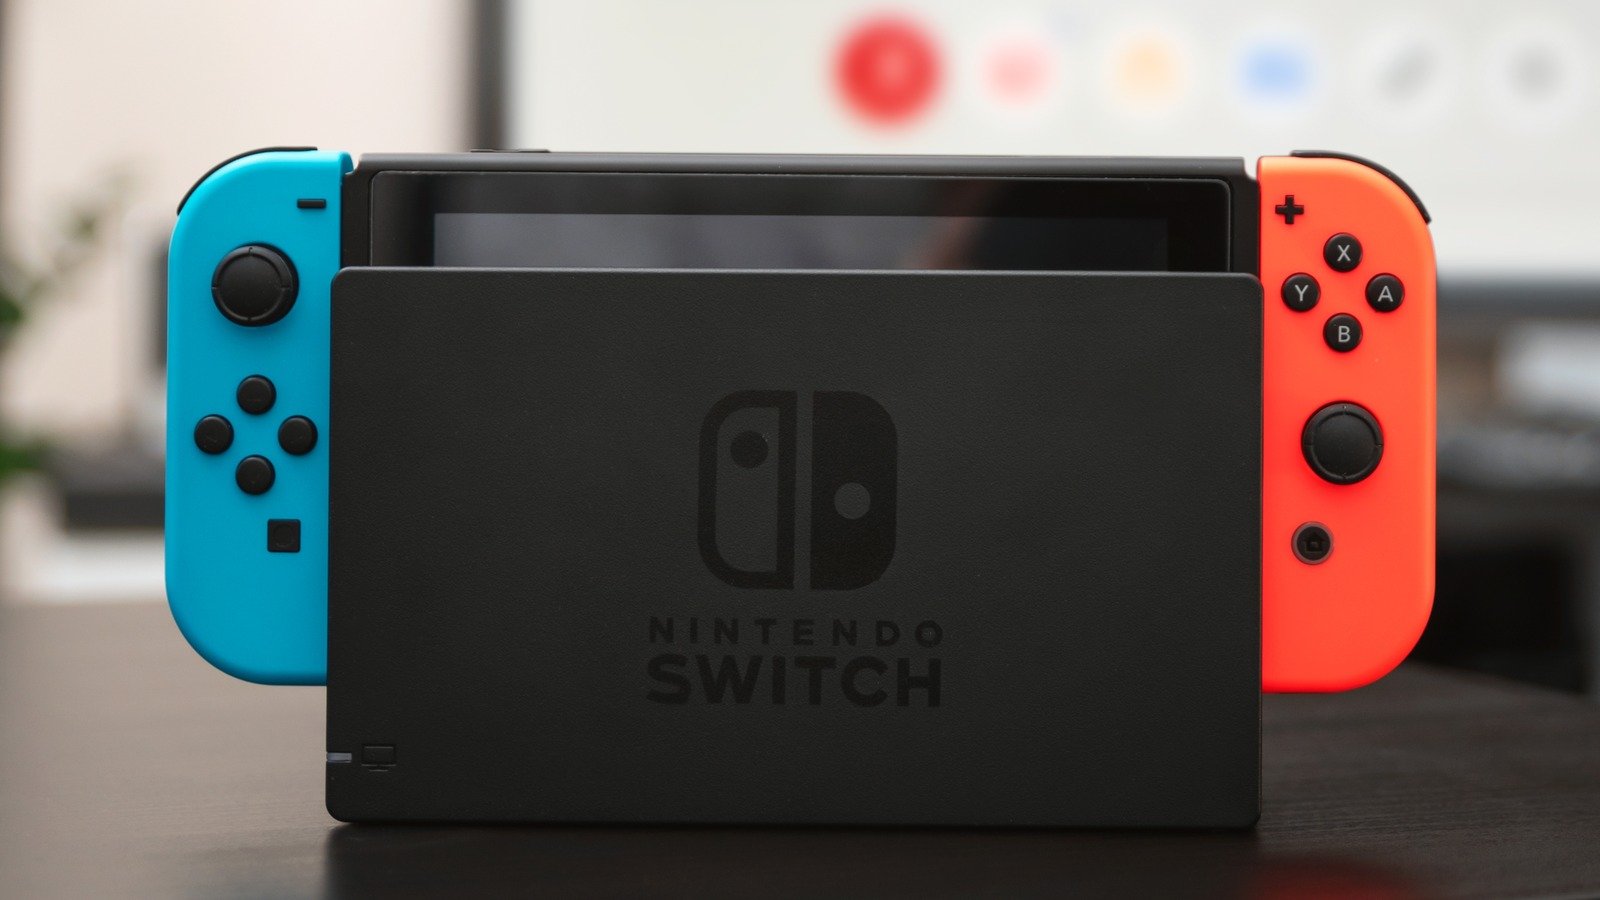 Can You Watch Live TV On The Nintendo Switch?